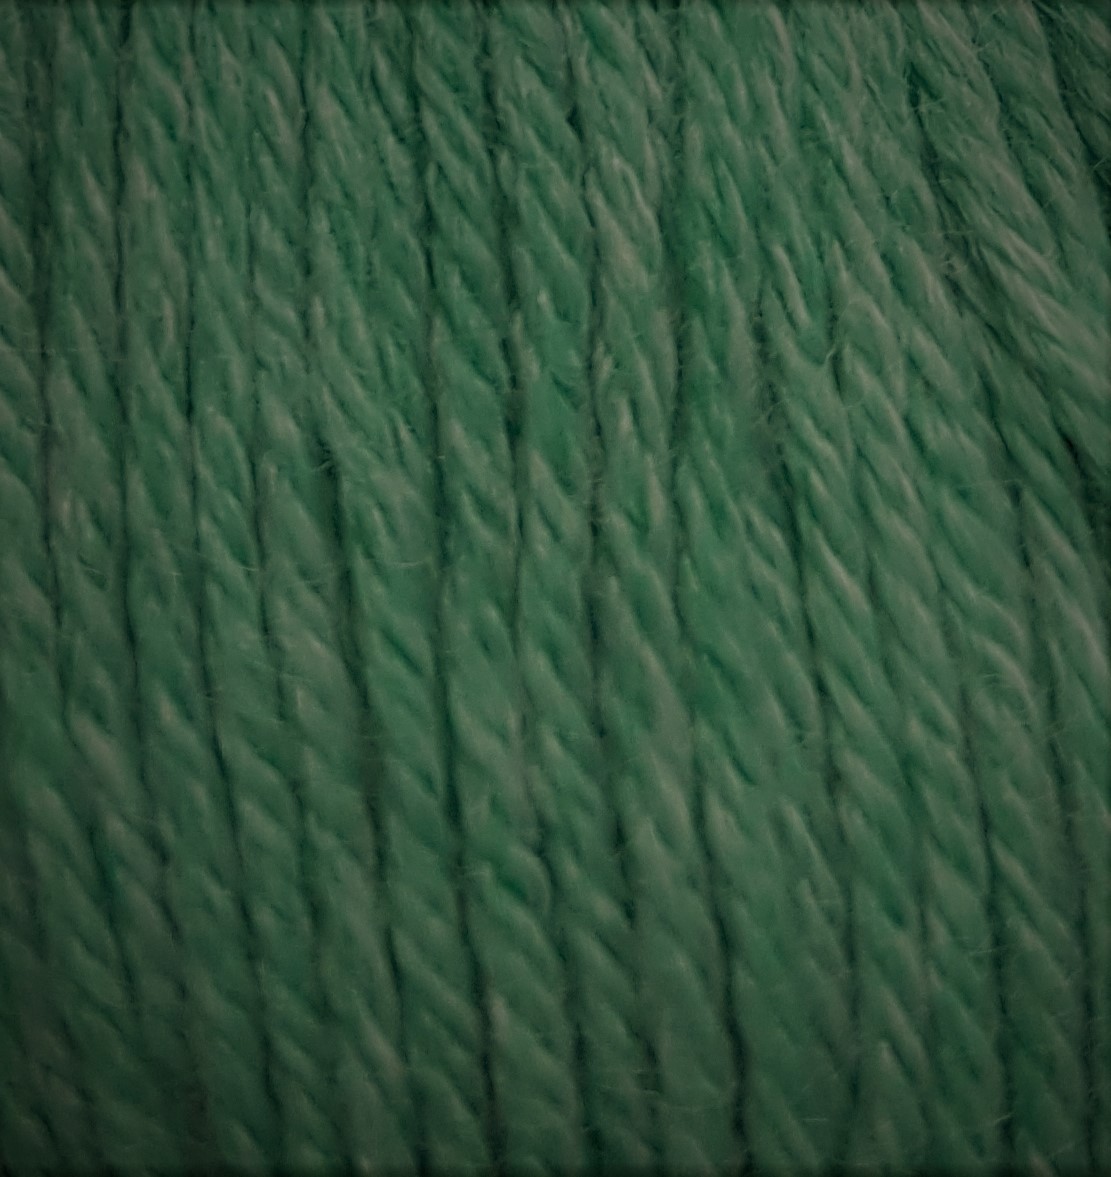 Tradition Sock 1824 Seafoam from Diamond Luxury Collection with wool, acrylic, and nylon